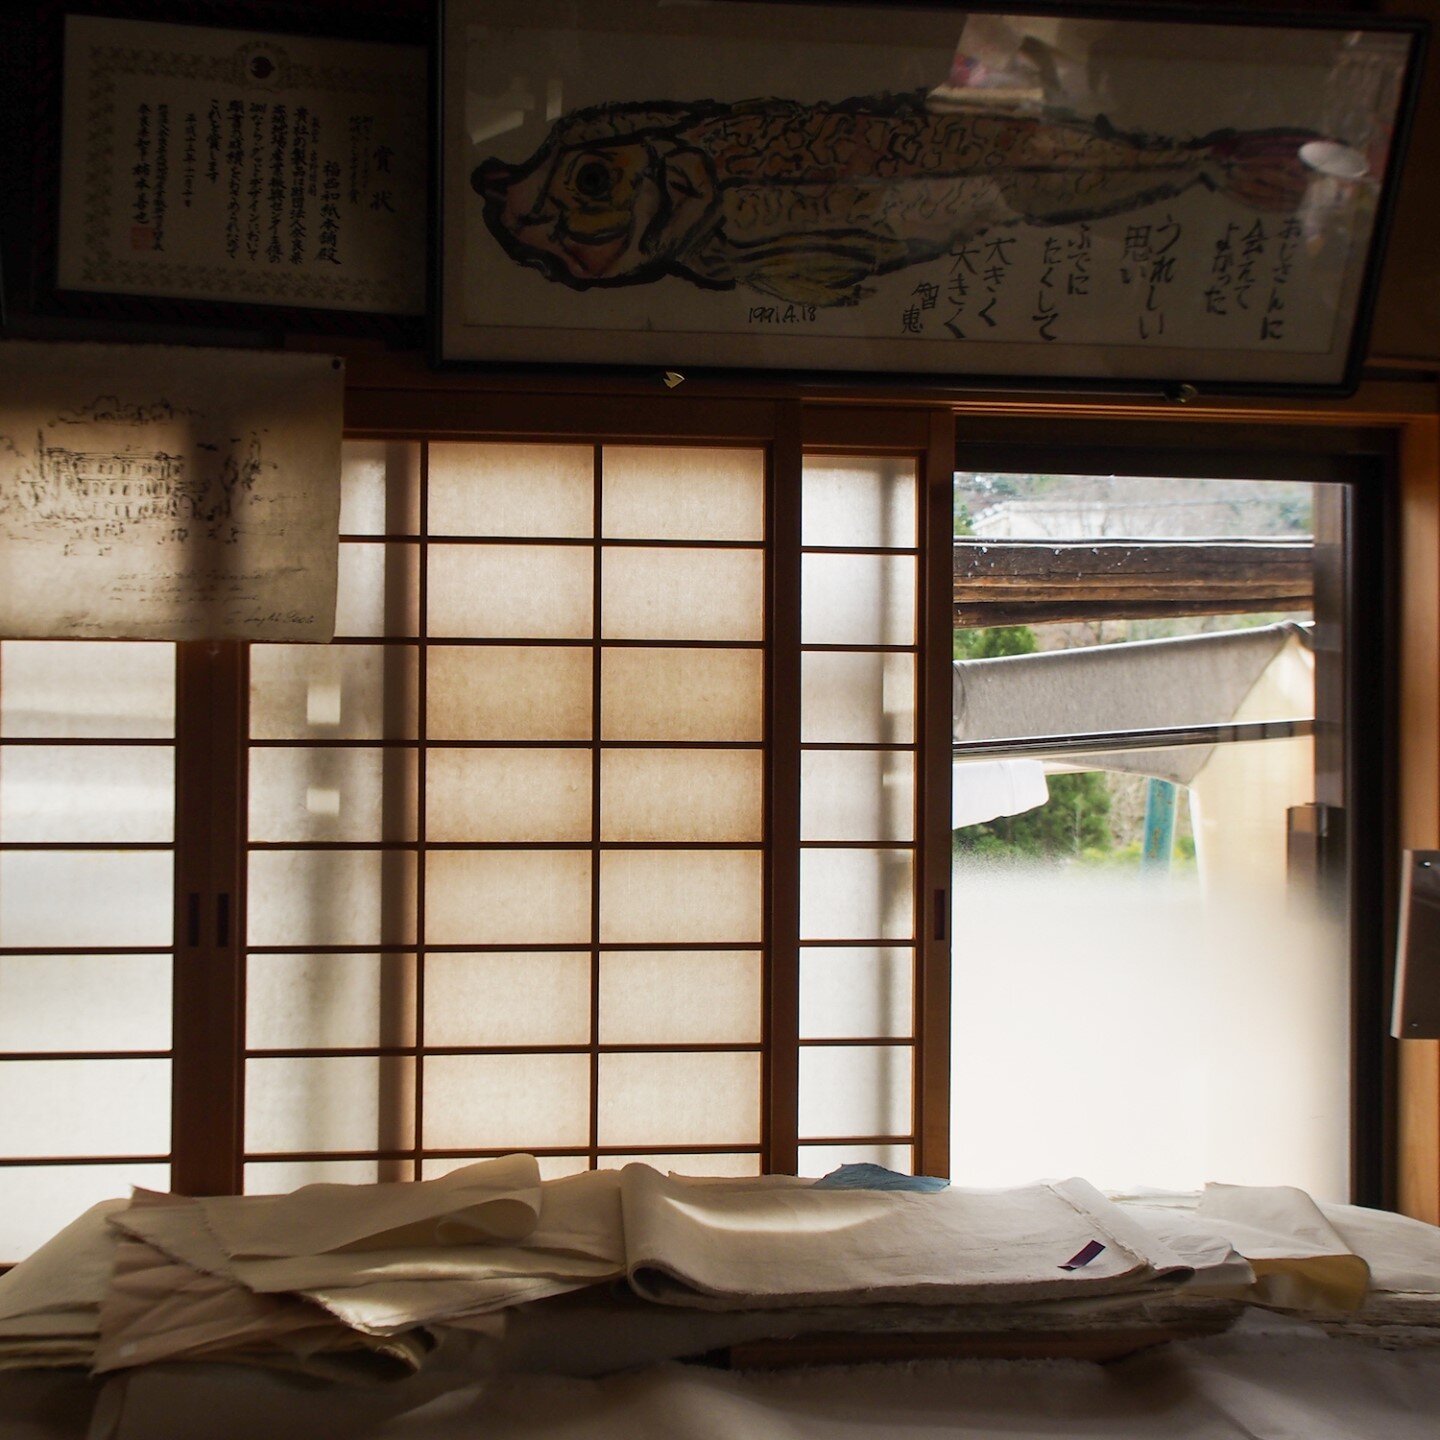 A serene and peaceful morning in a washi paper artisan&rsquo;s atelier. Surrounded by centuries of tradition and craftsmanship, time seems to flow at a different pace. 

 #washi #zen #japanesedesign #japanarchitecture #japantravel #livetotravel #igja